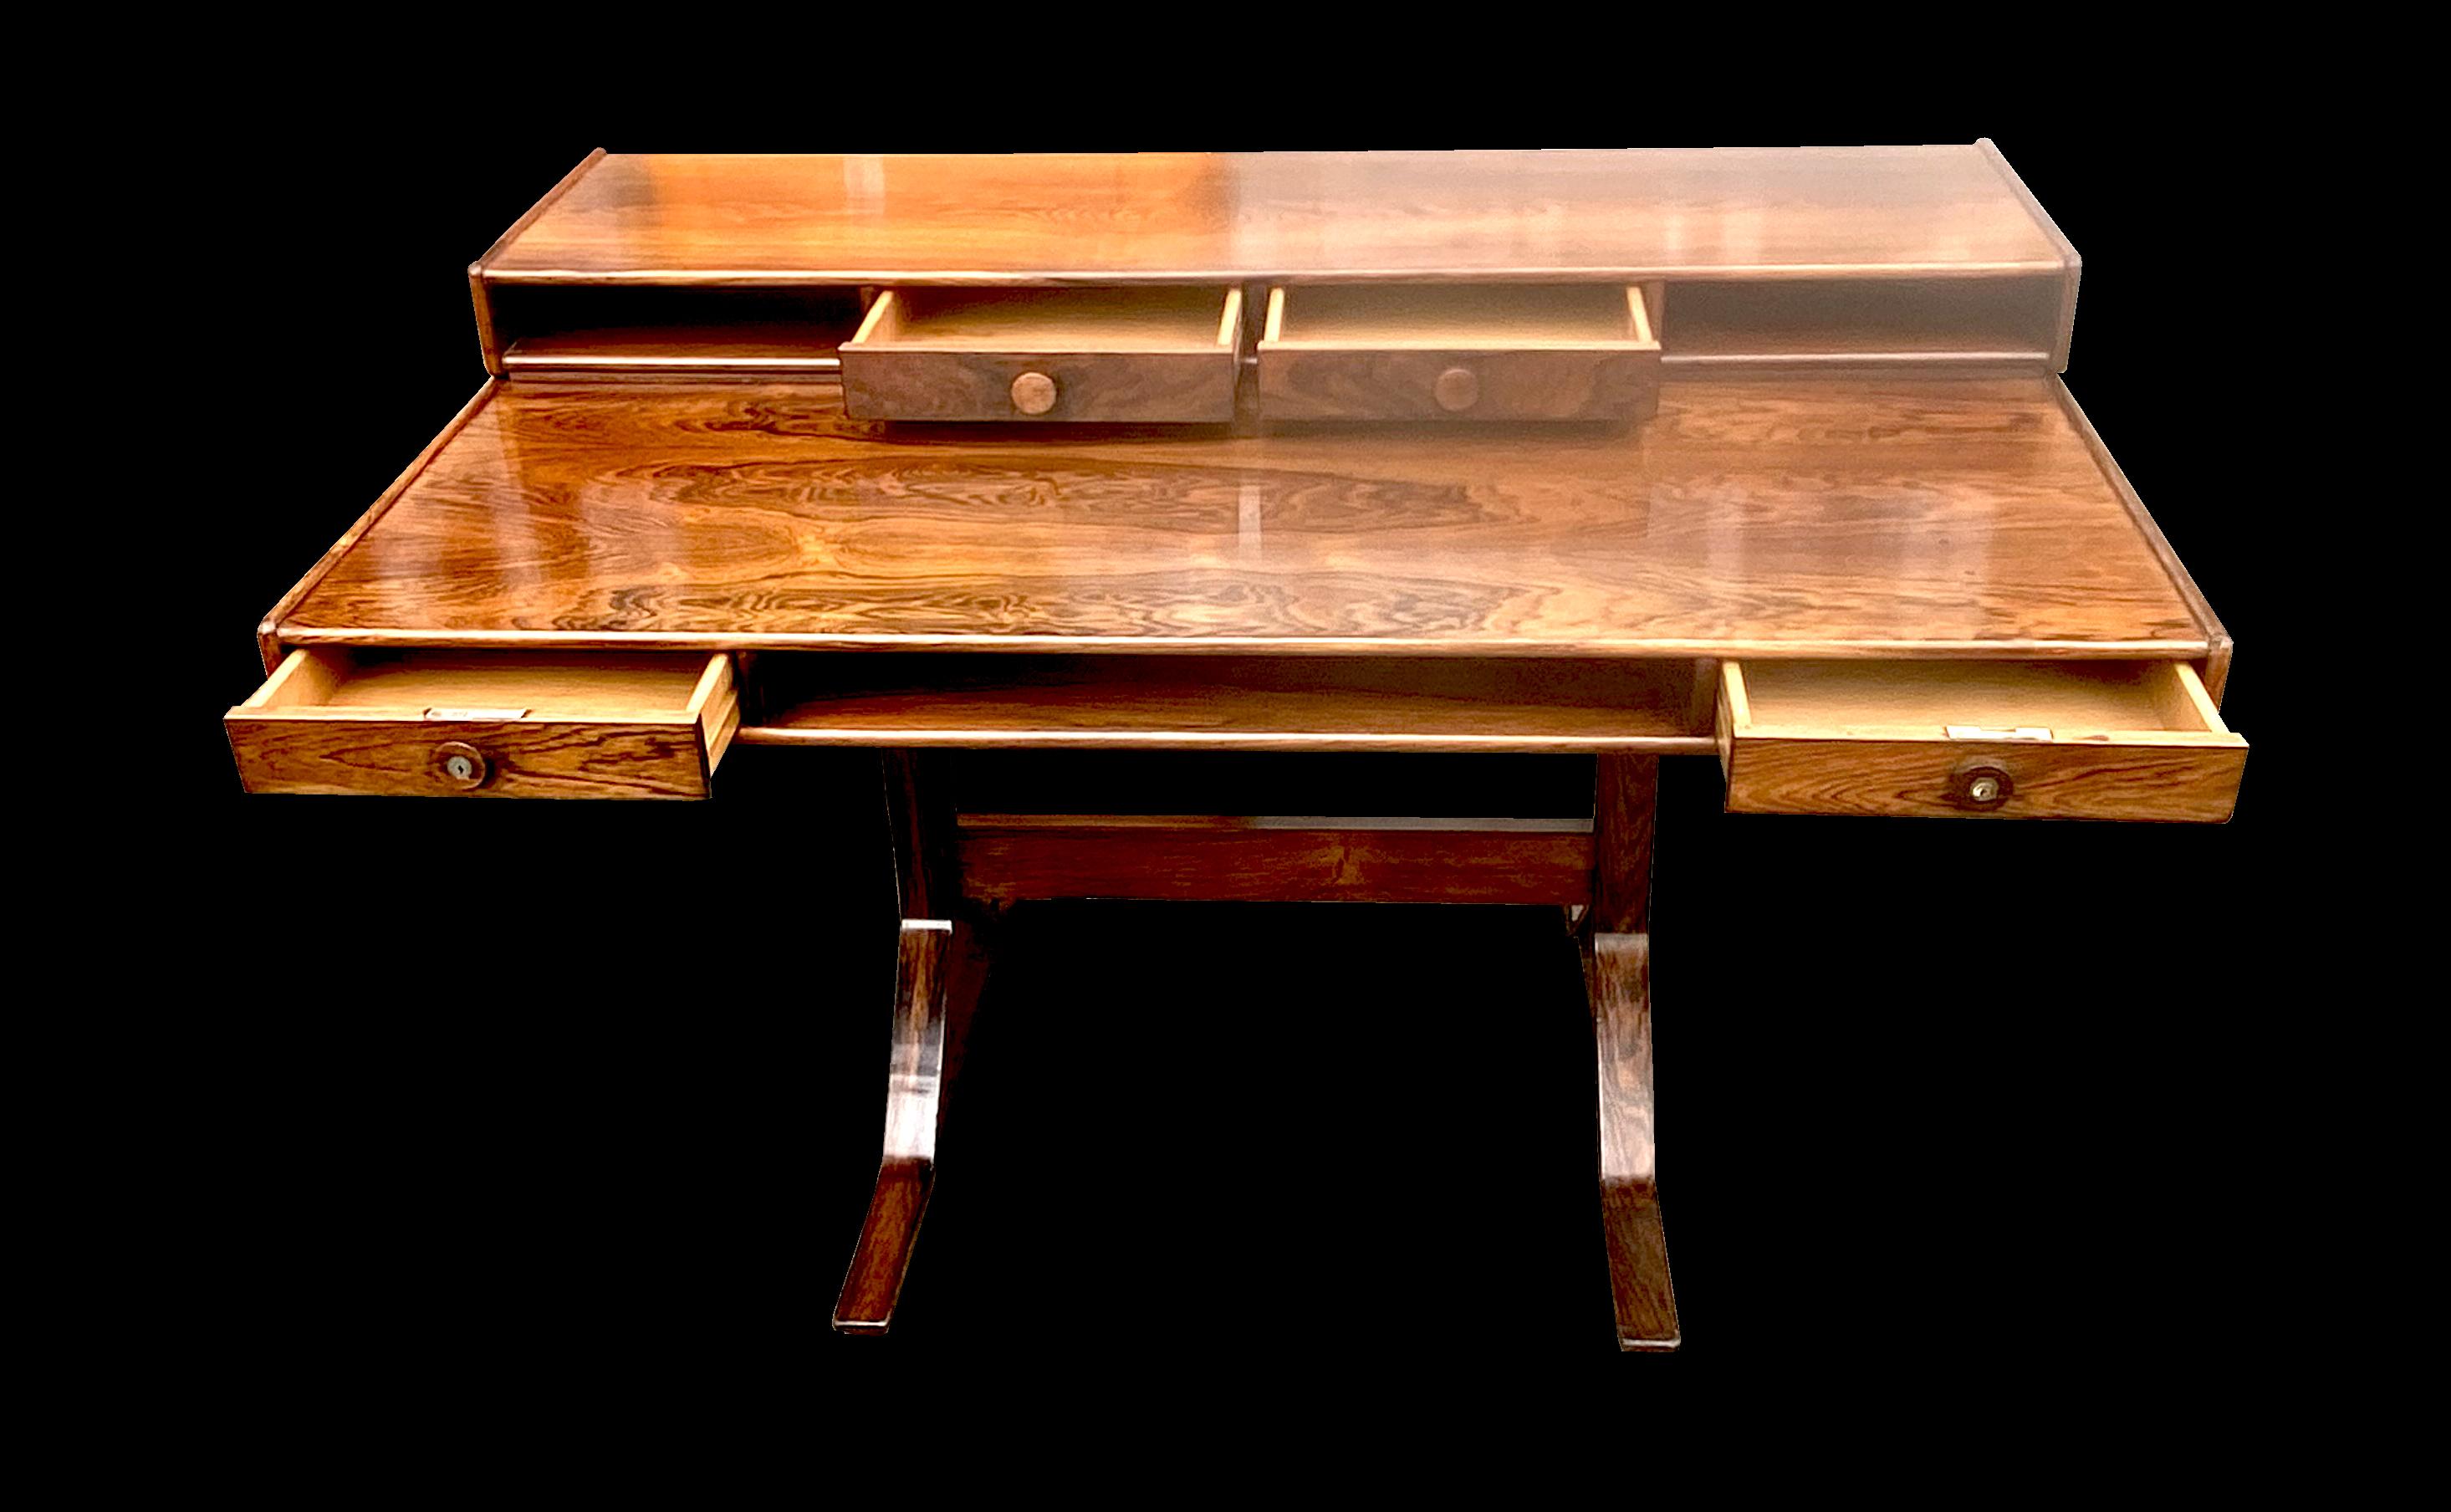 This is a fabulous example of this Italian mid century desk by Gianfranco Frattini and produced by Bernini, consisting of 2 drawers and a pigeon hole on the lower tier and 2 drawers and 2 pigeon holes on the top tier all of which is supported by